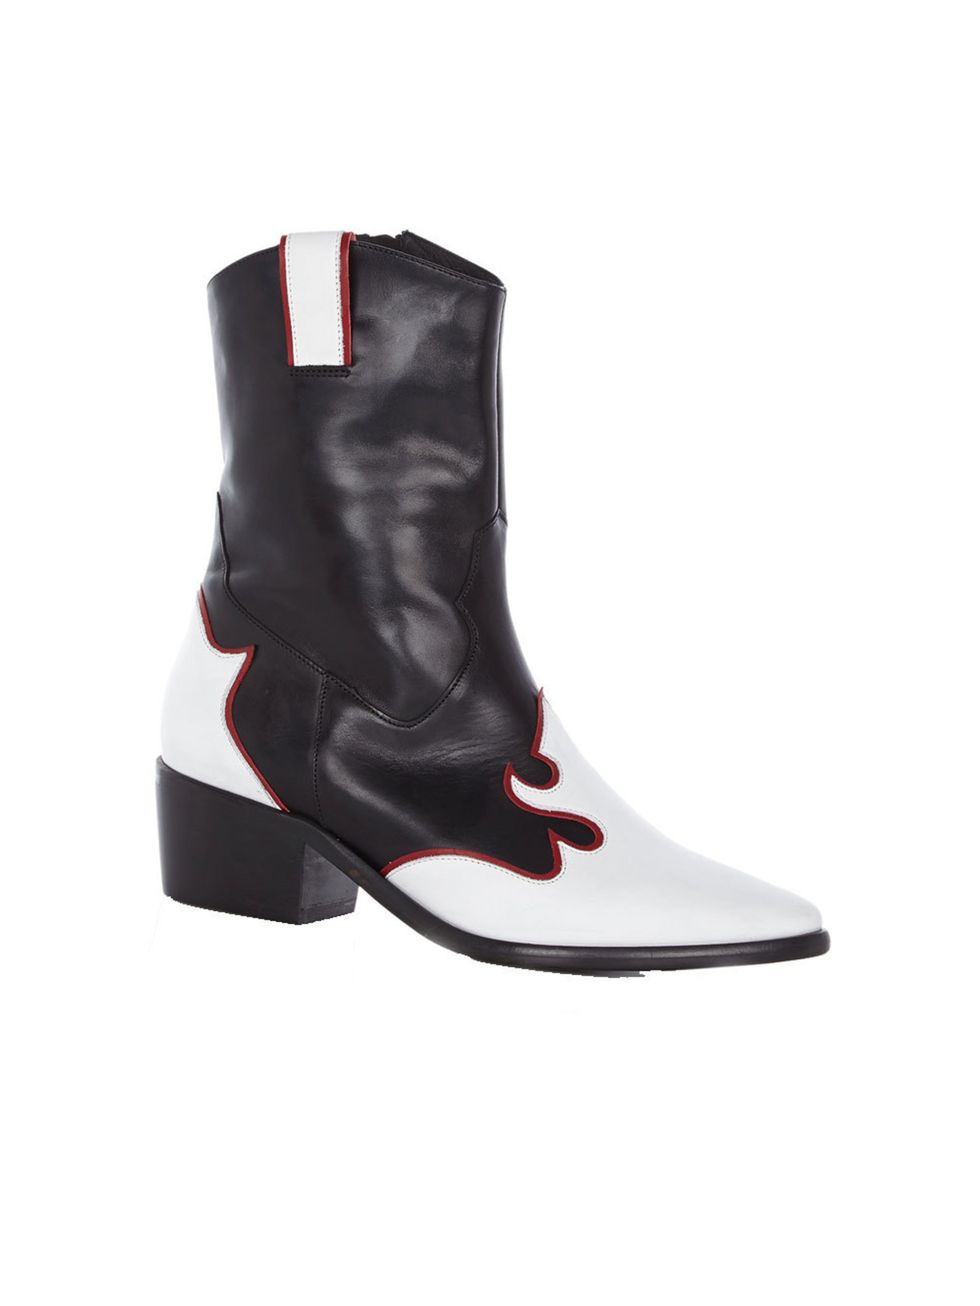 Boot, Leather, Carmine, Black, Maroon, Costume accessory, Work boots, Riding boot, Synthetic rubber, Steel-toe boot, 